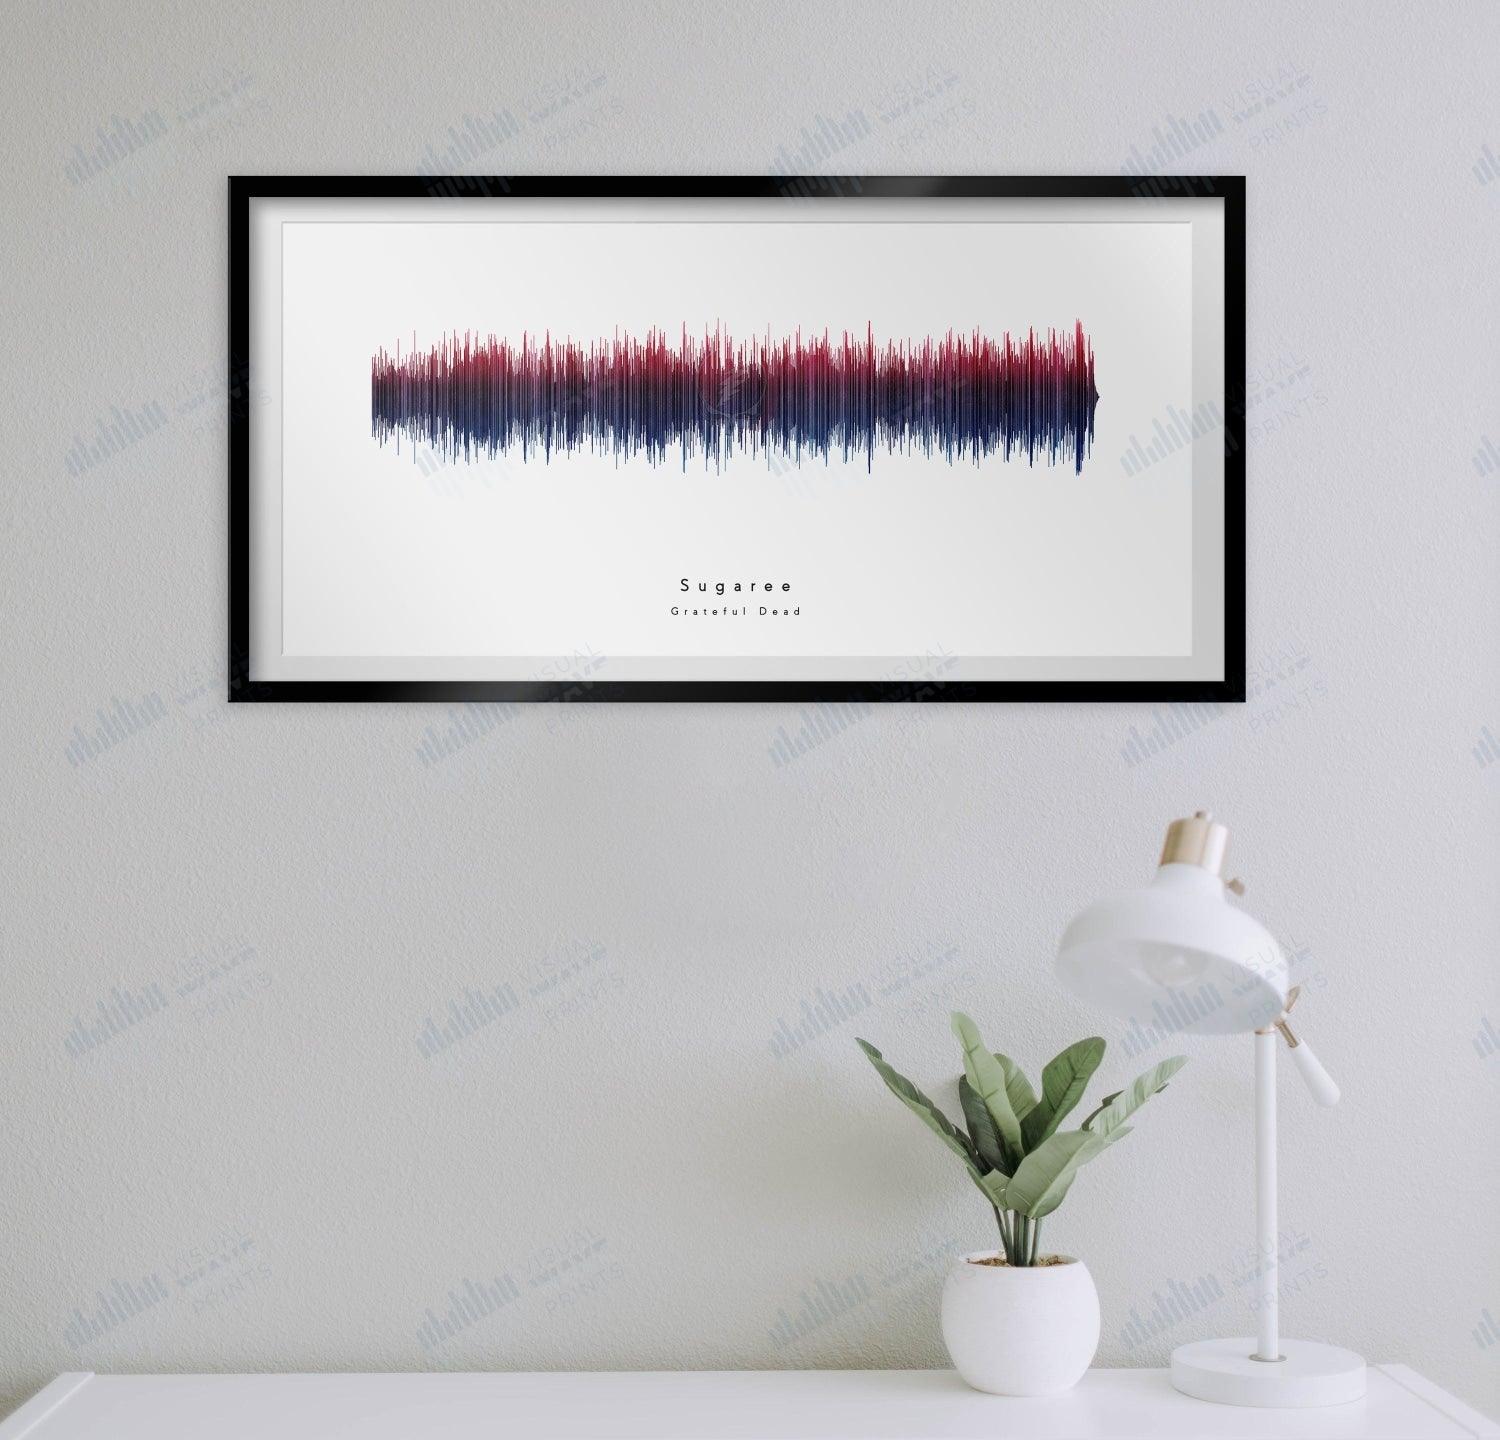 Sugaree by The Grateful Dead - Visual Wave Prints